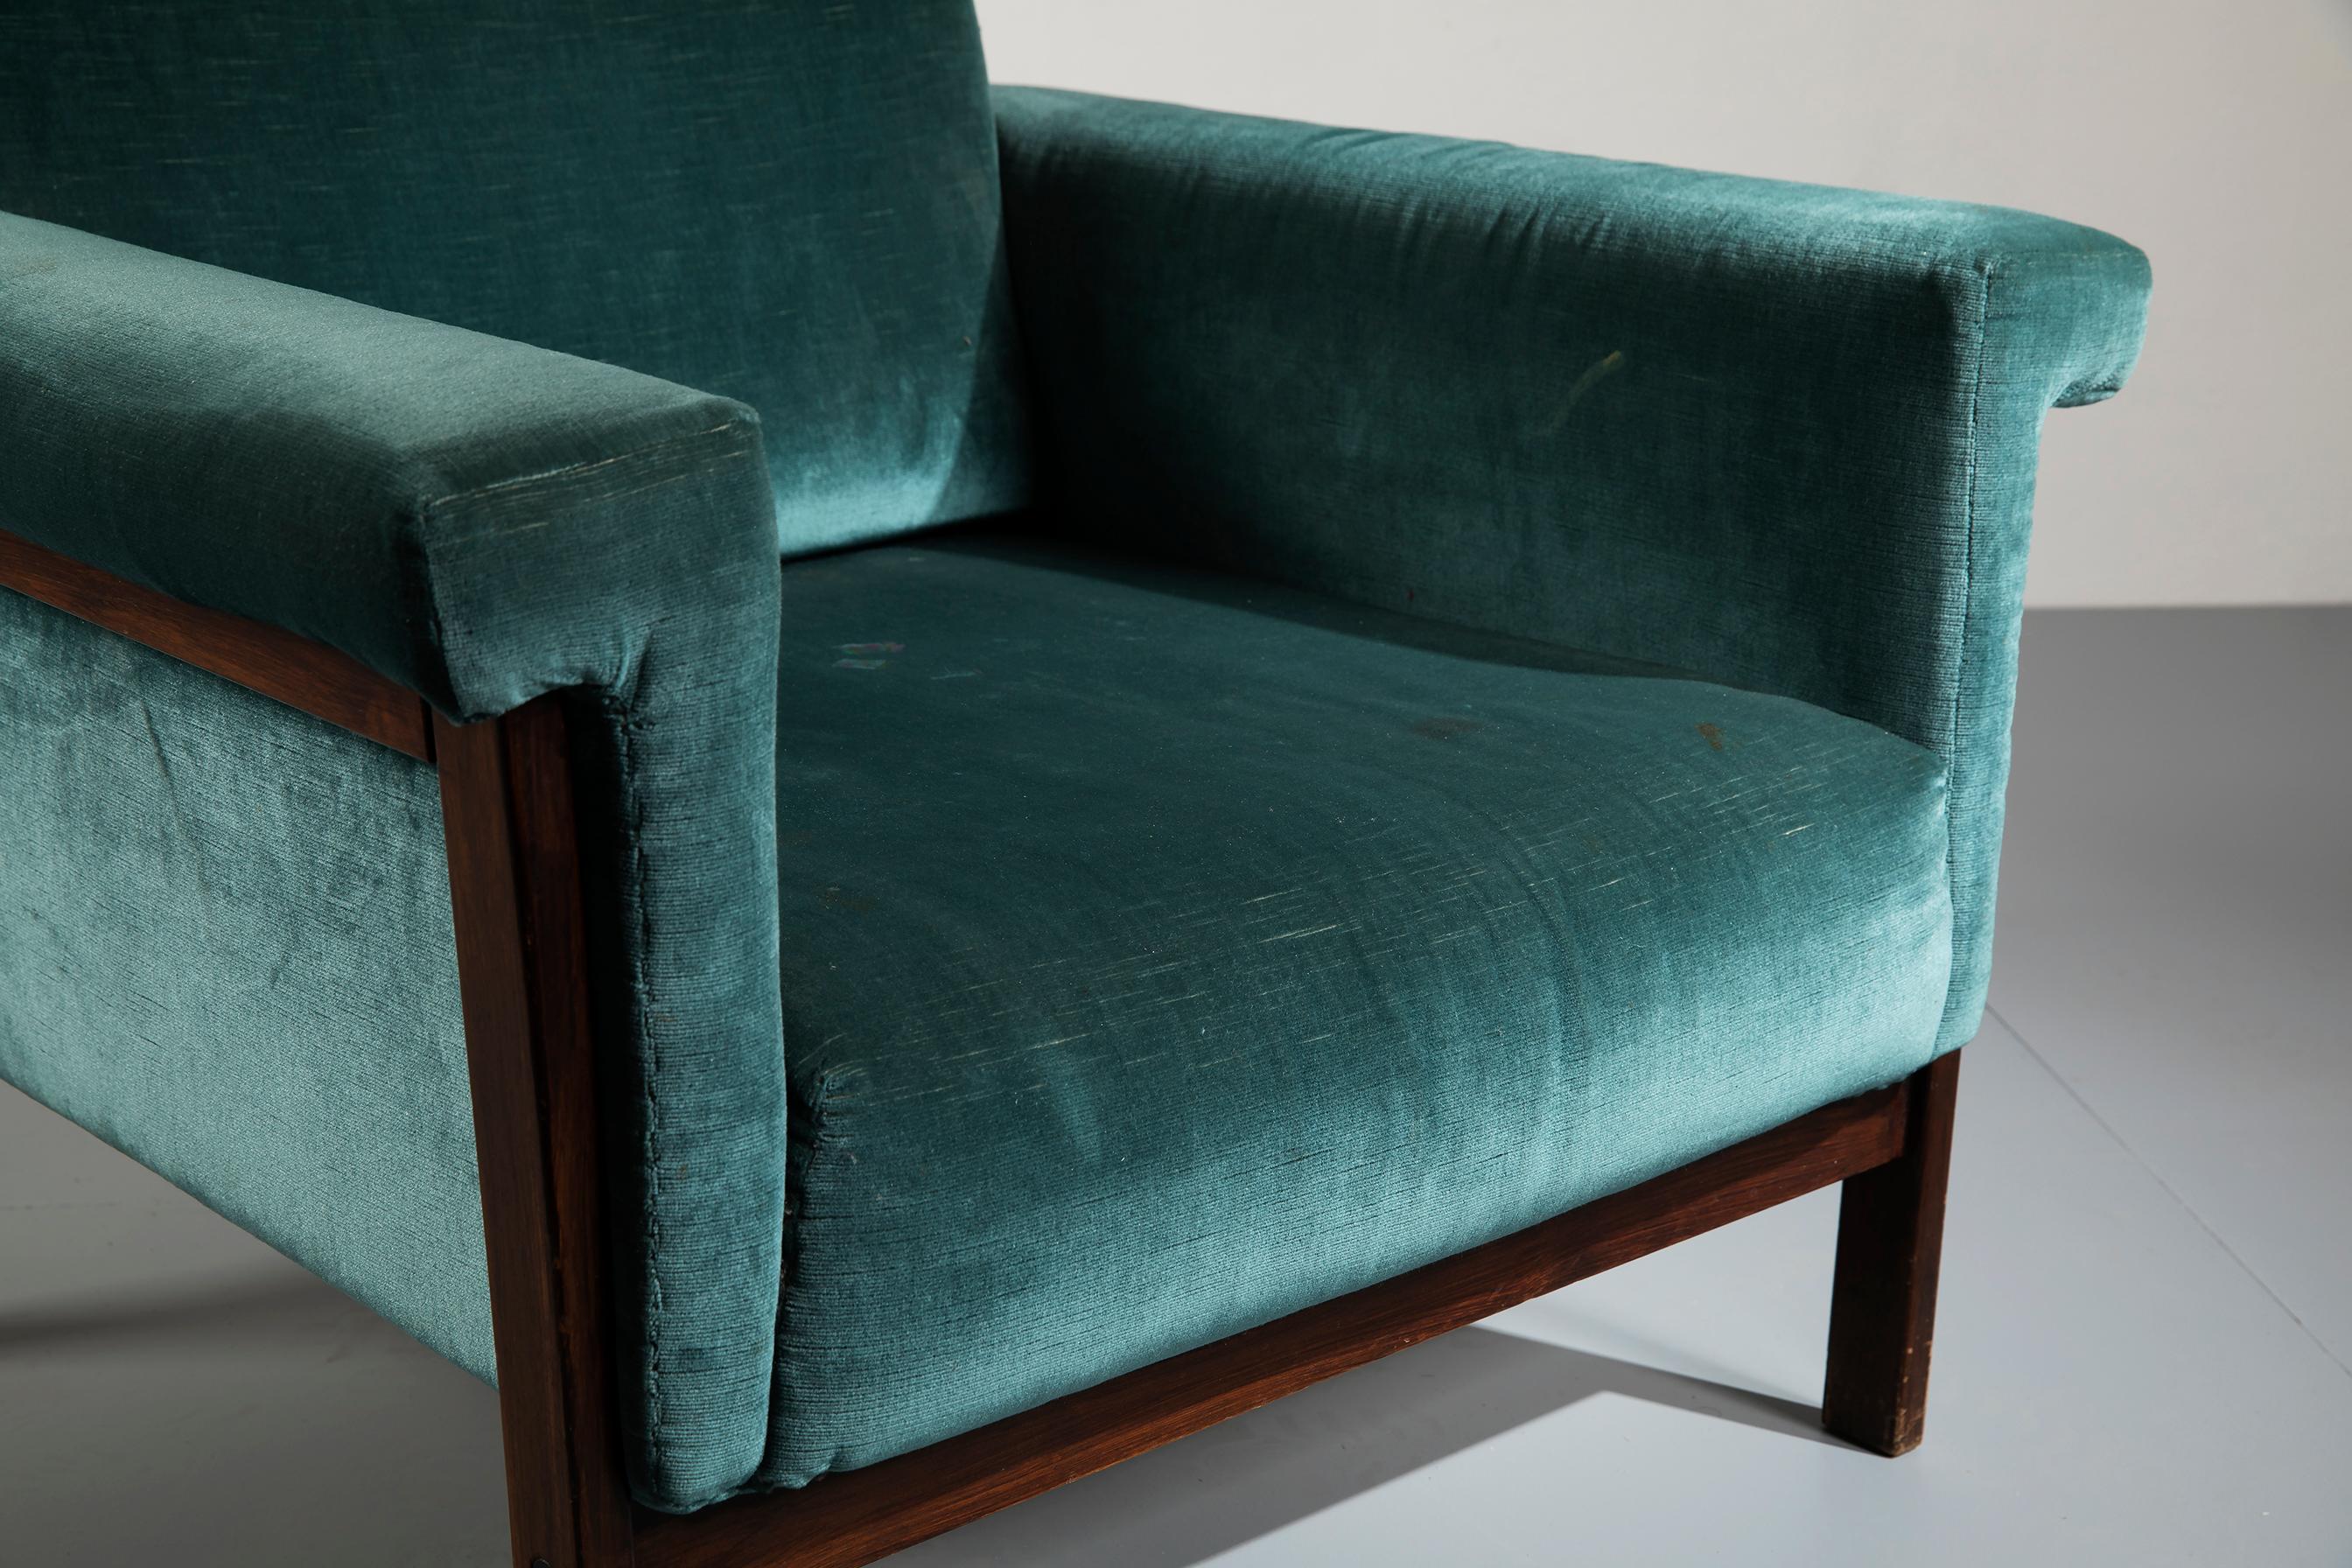 Italian Ettore Sottsass Rosewood and Teal Fabric 'Canada' Armchair for Poltronova, 1958 For Sale